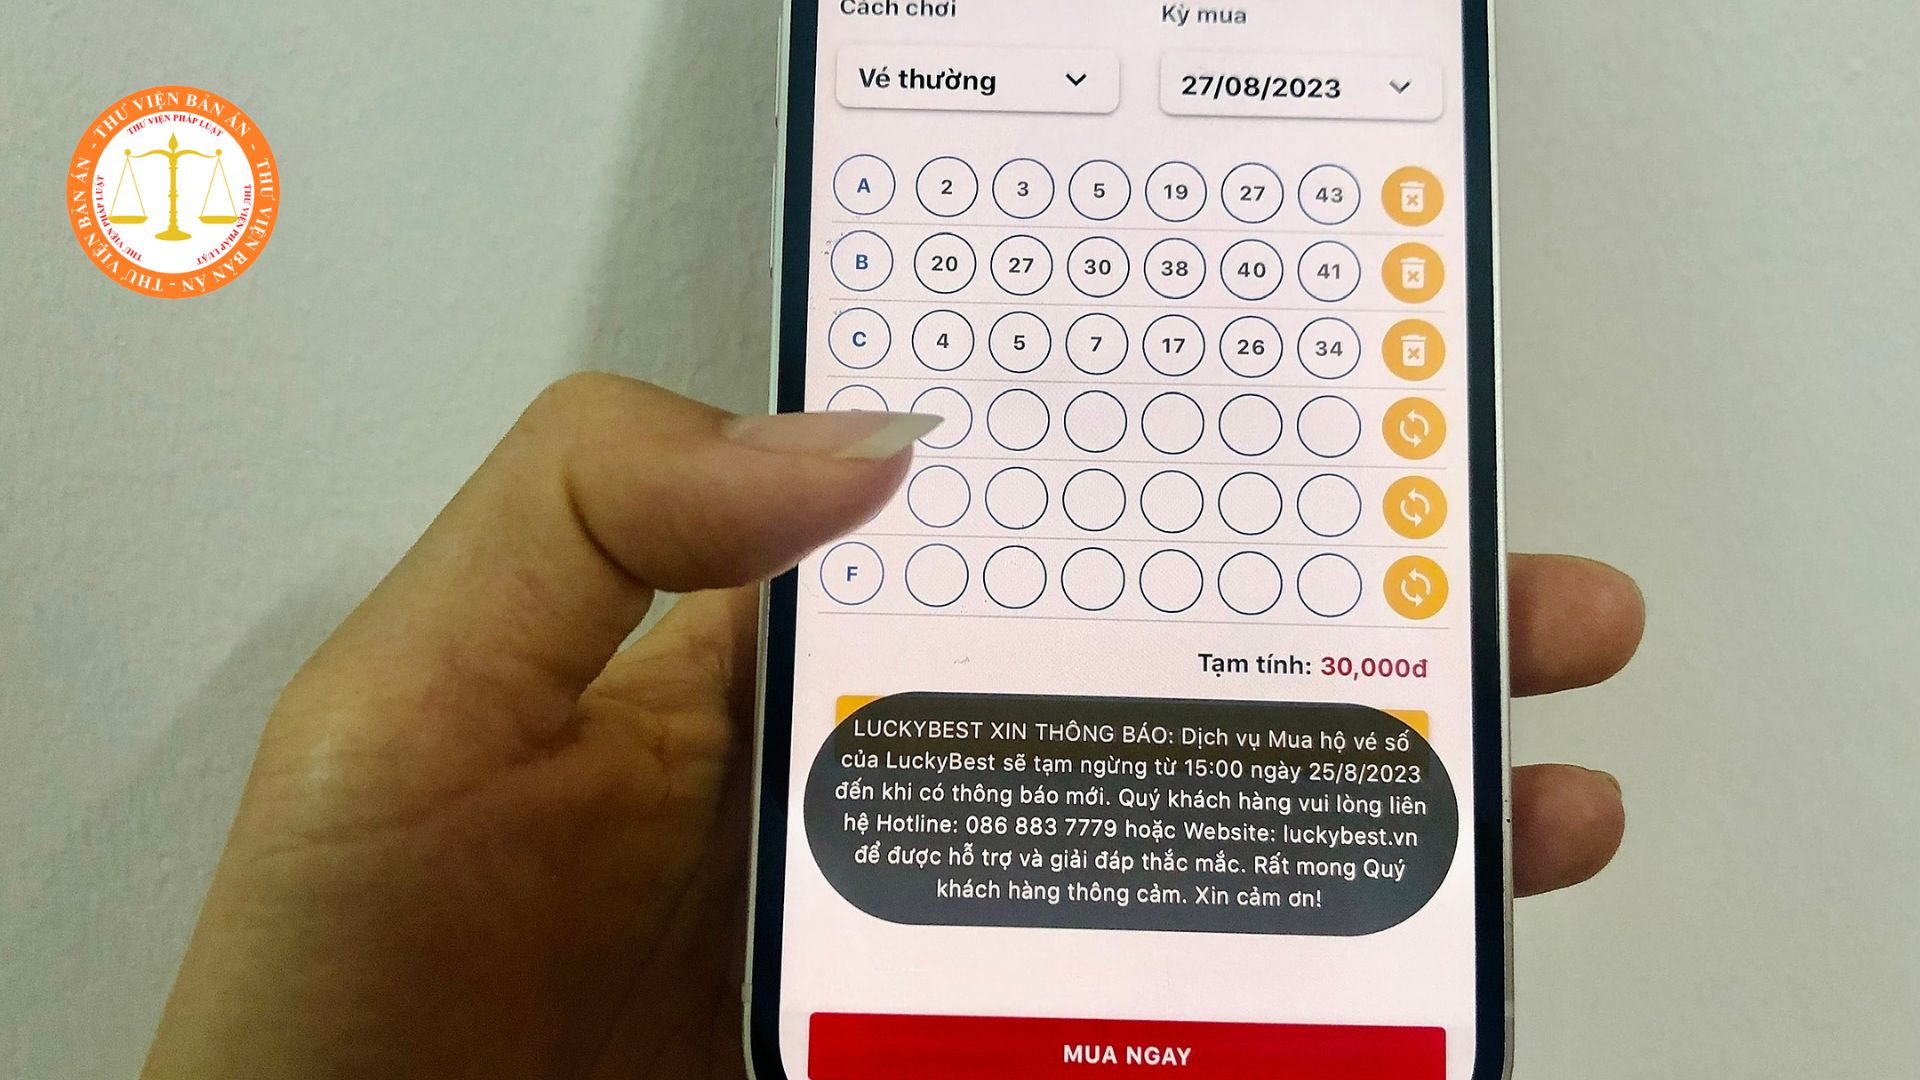 Is it against the law for playing online lottery in Vietnam?